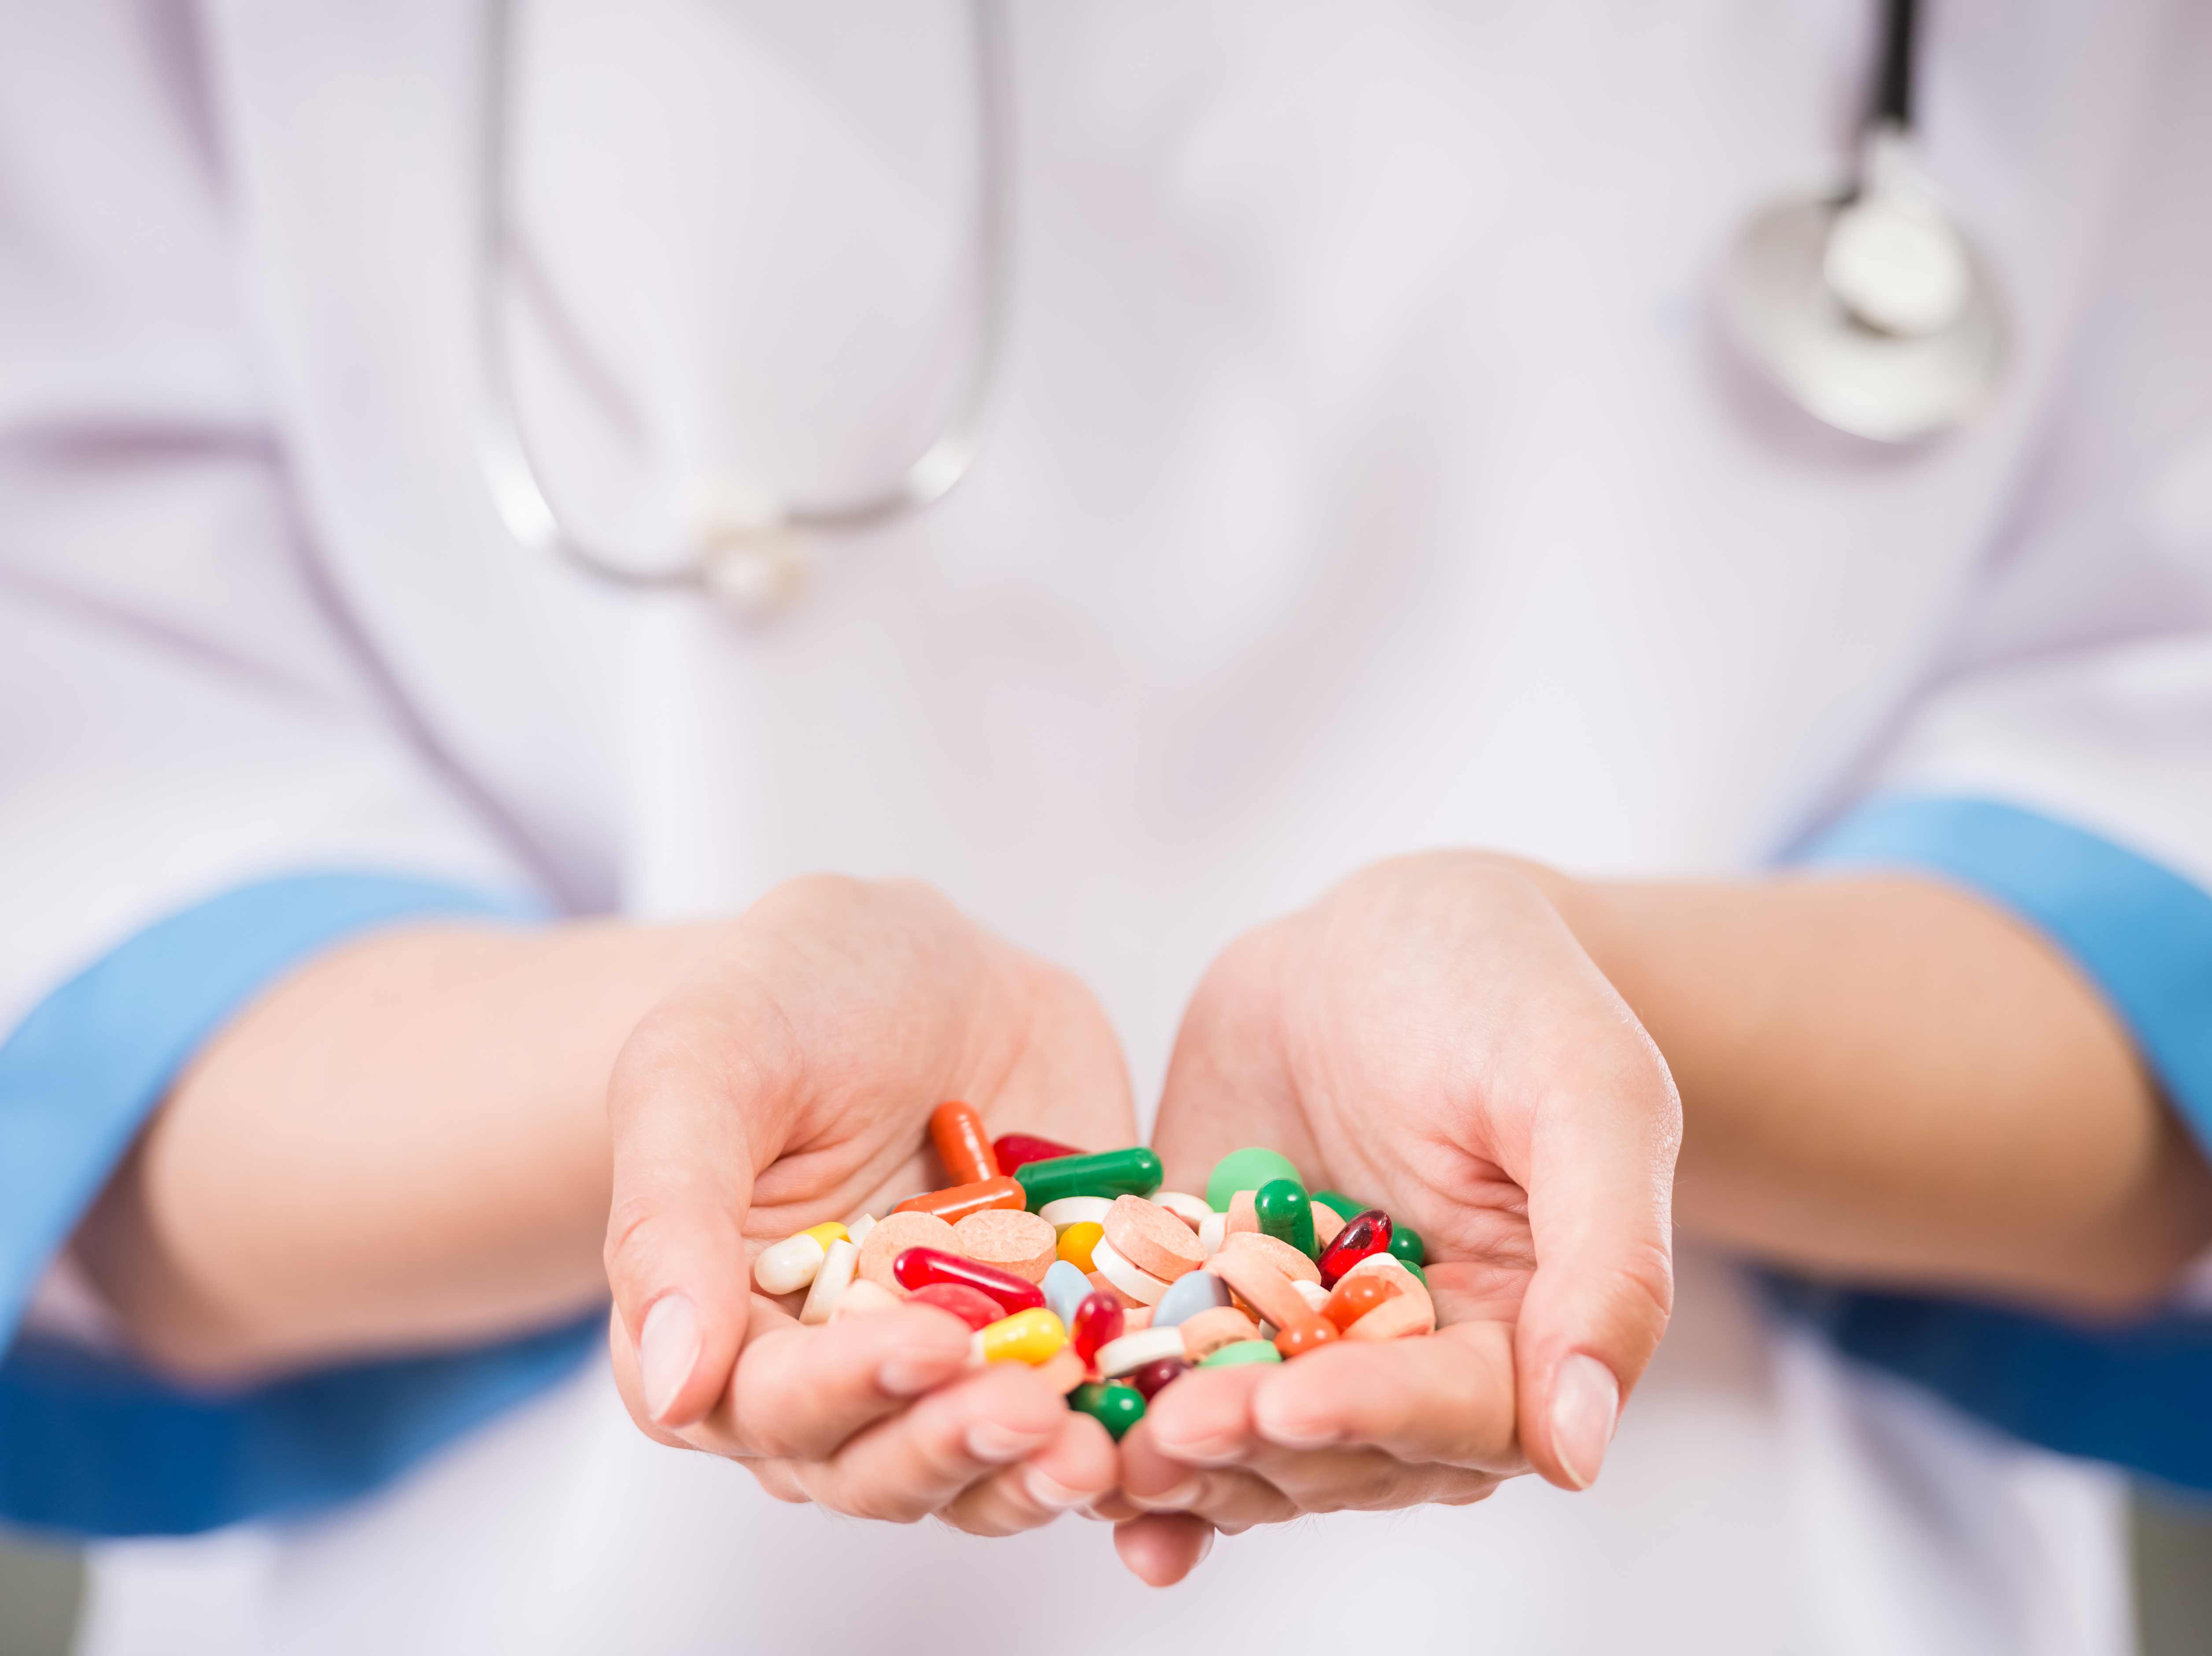 Doctors would have you take statins like vitamins